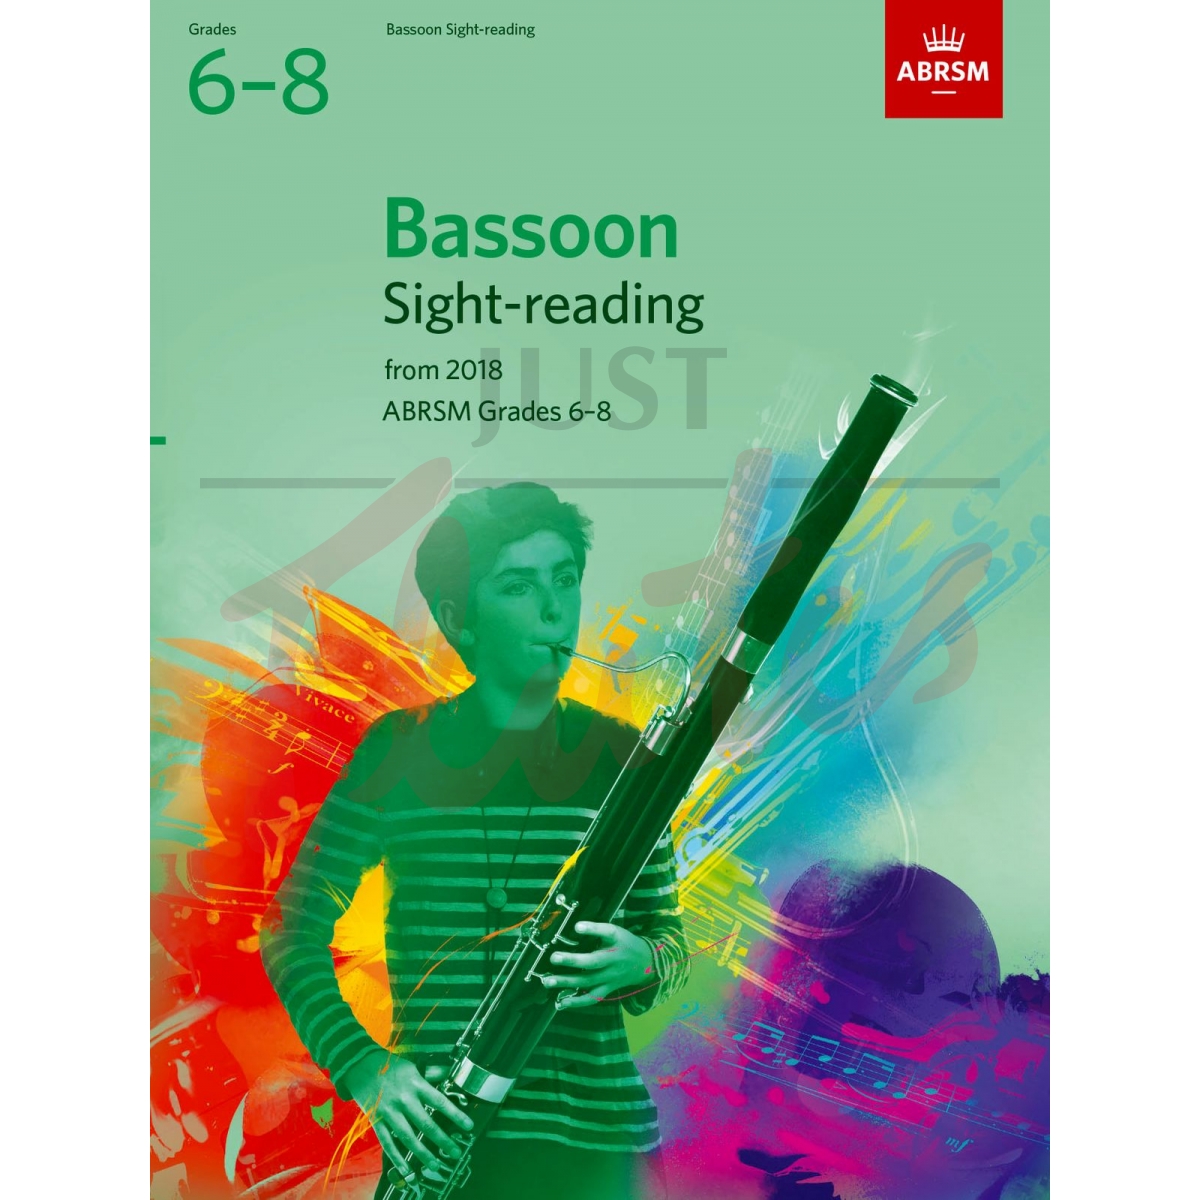 Sight-Reading Tests Grades 6-8 (from 2018) [Bassoon]